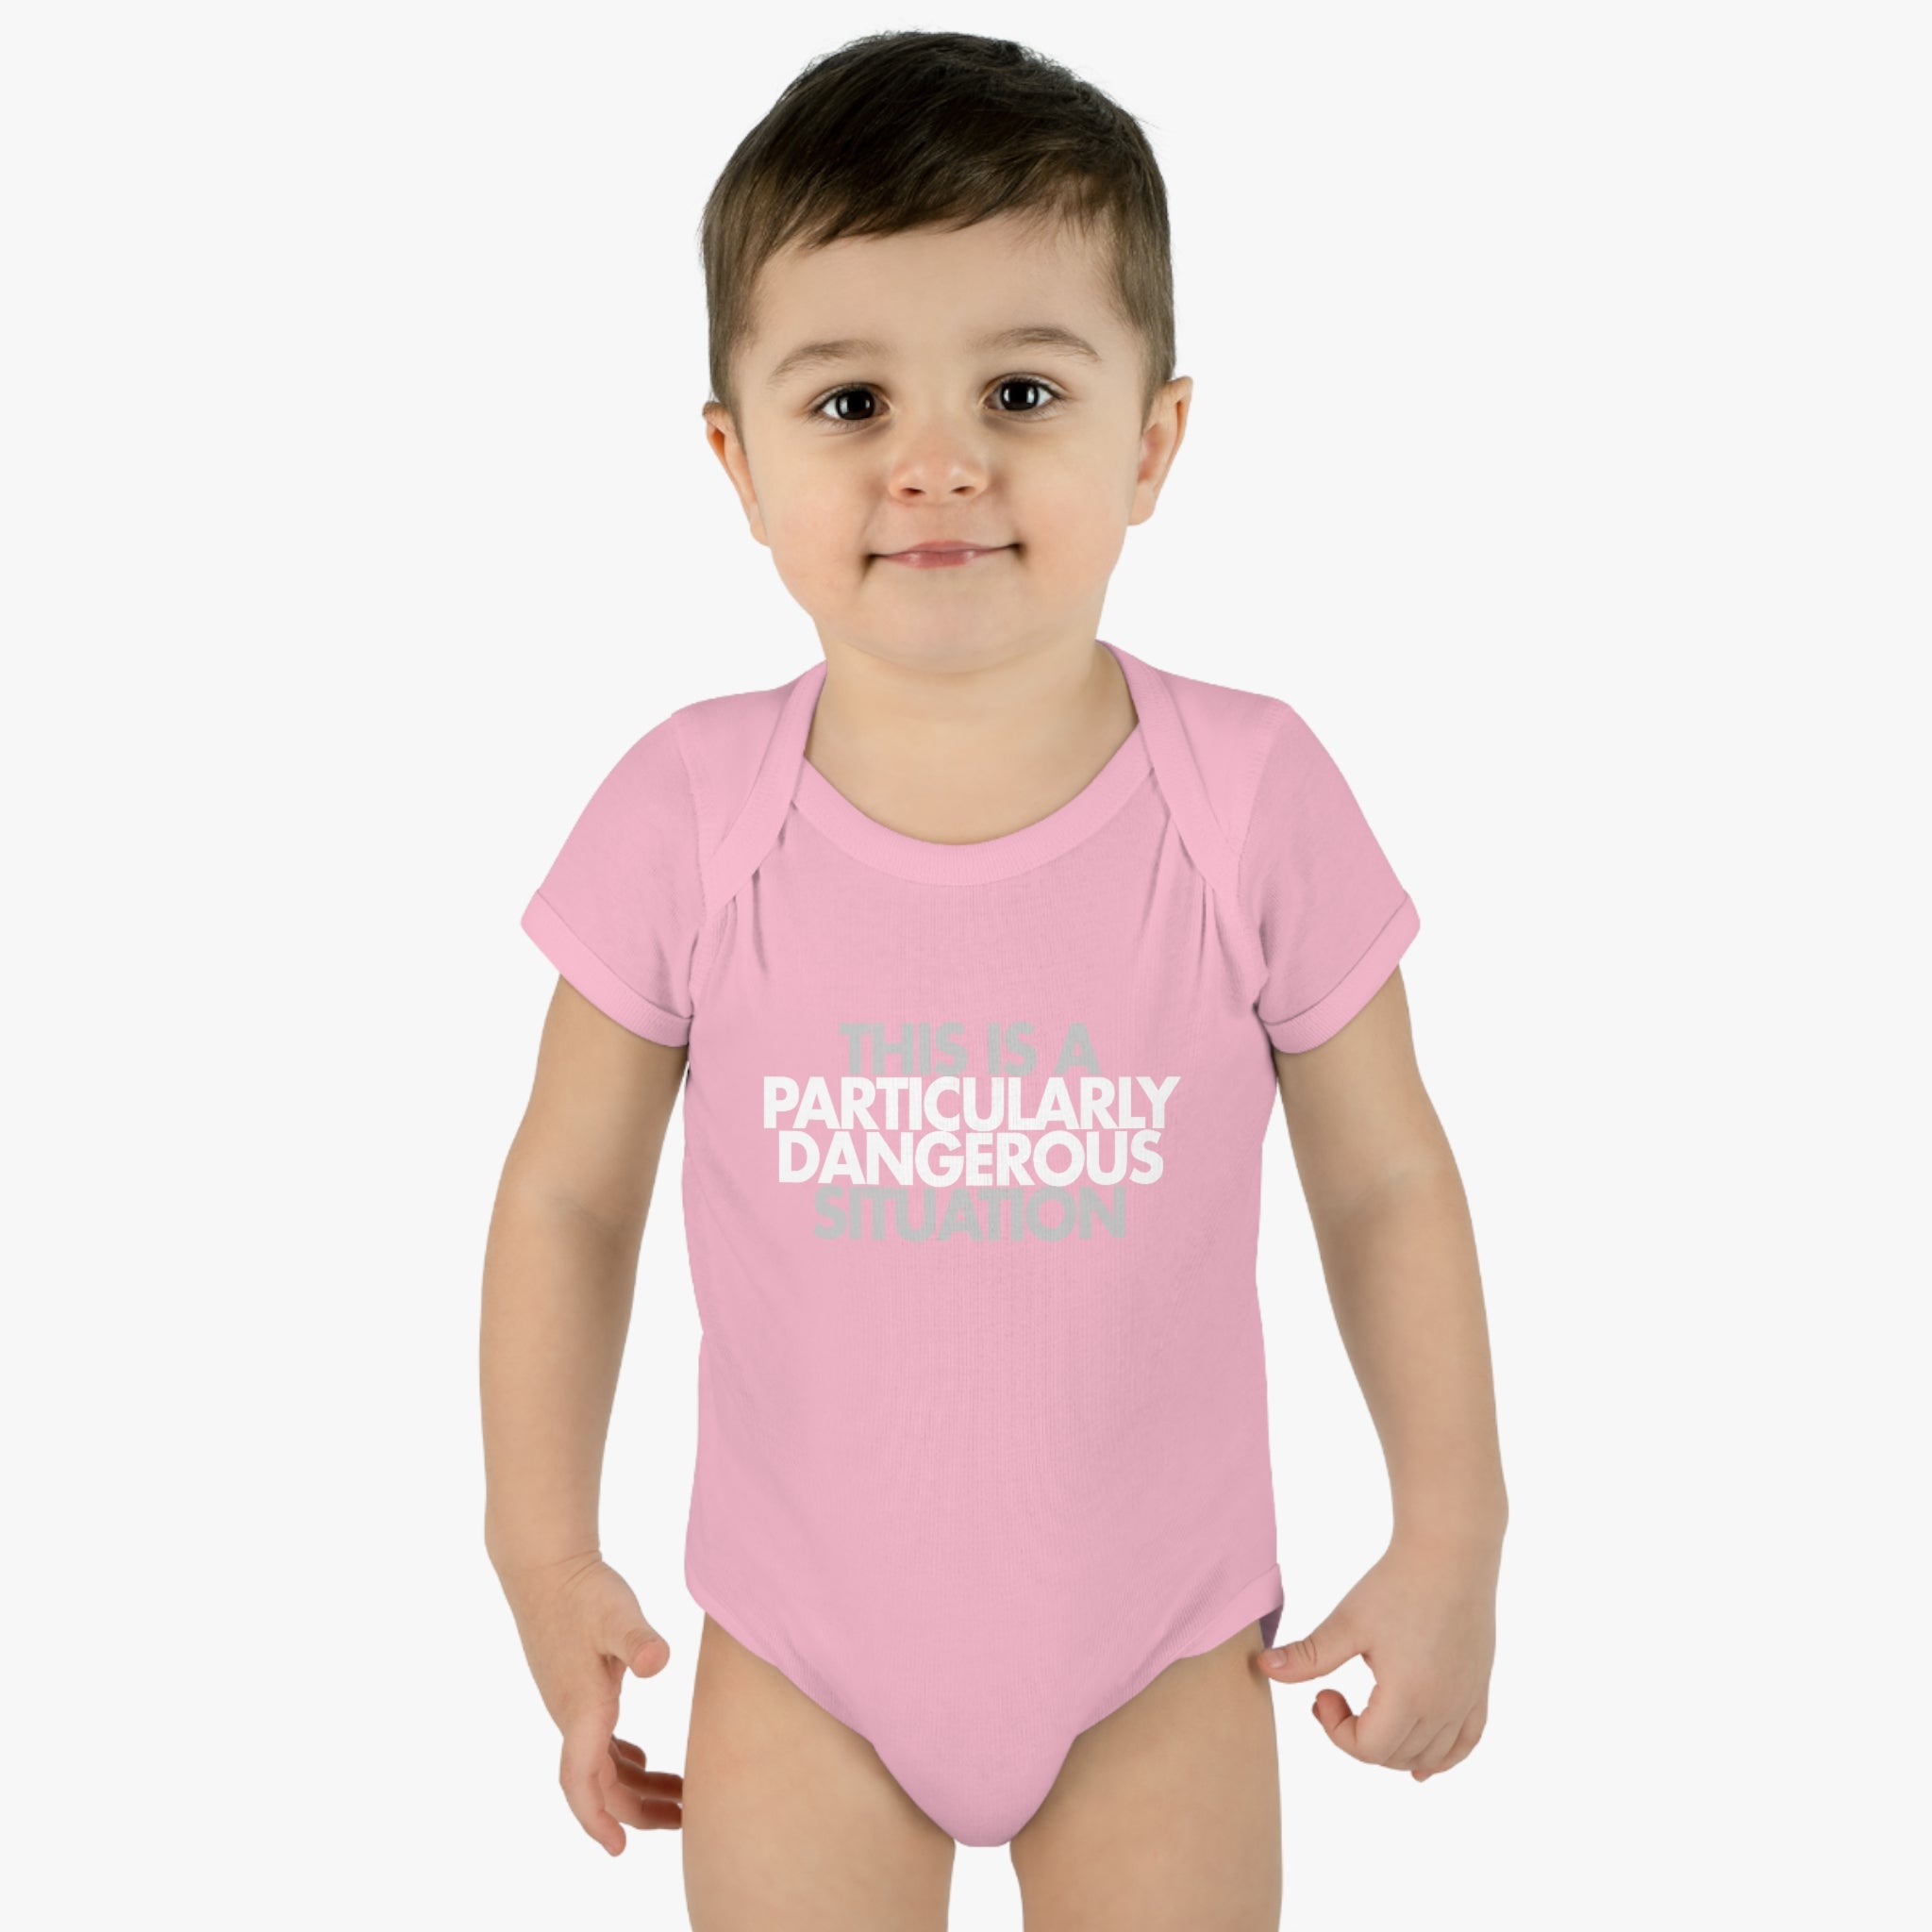 This is a PDS Infant Bodysuit 